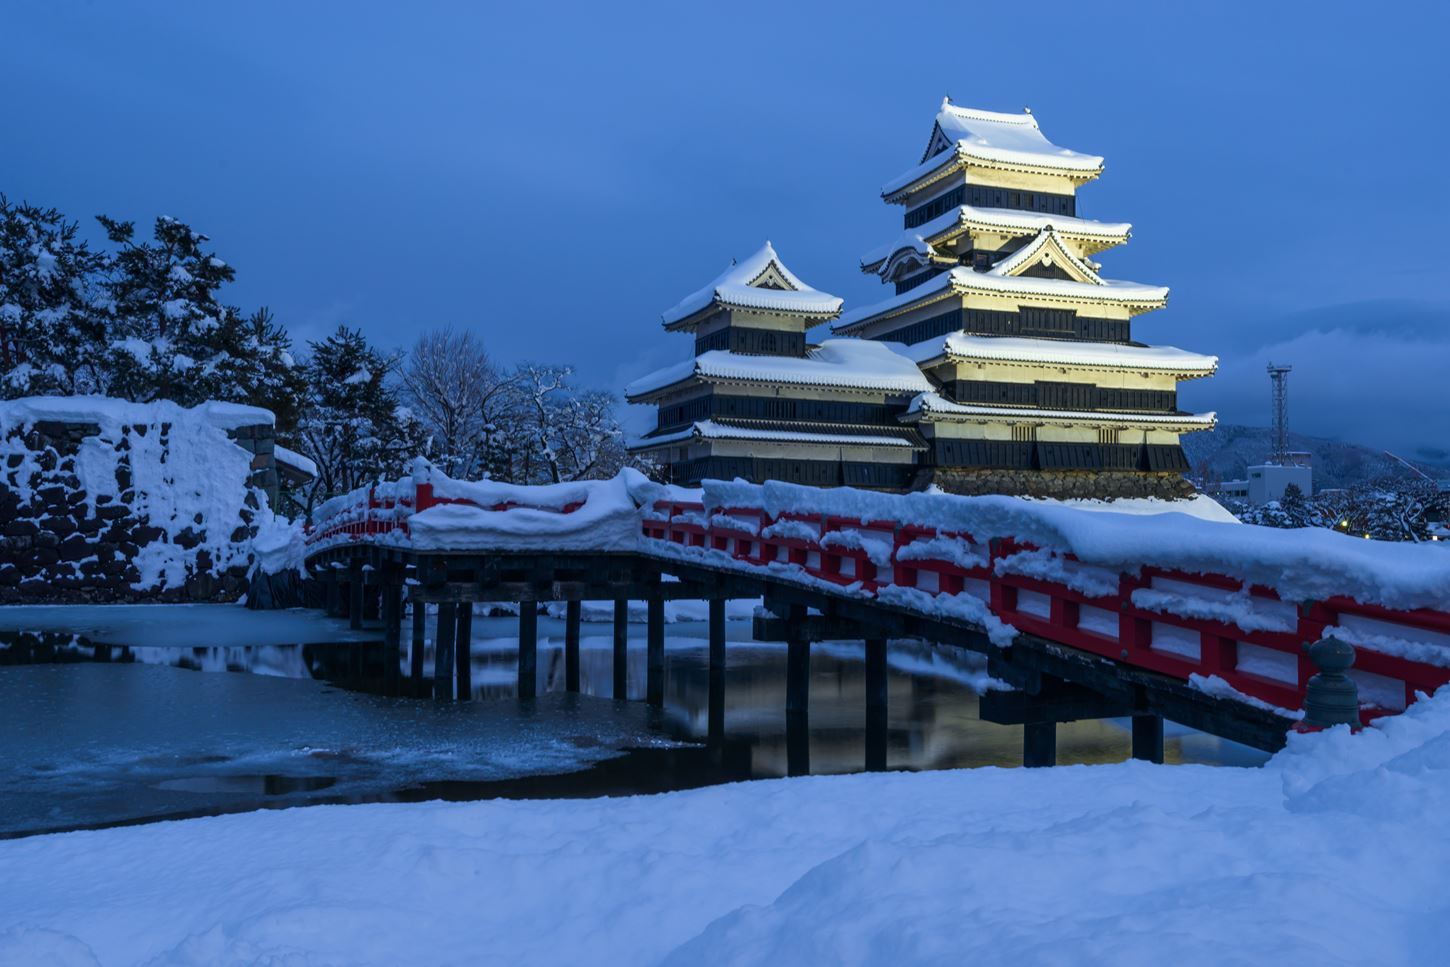 Matsumoto Castle in Winter at Twilight Scene on February Although snowfall in the basin is less than in mountainous areas, it can still be covered in white by heavy snowfall = Shutterstock